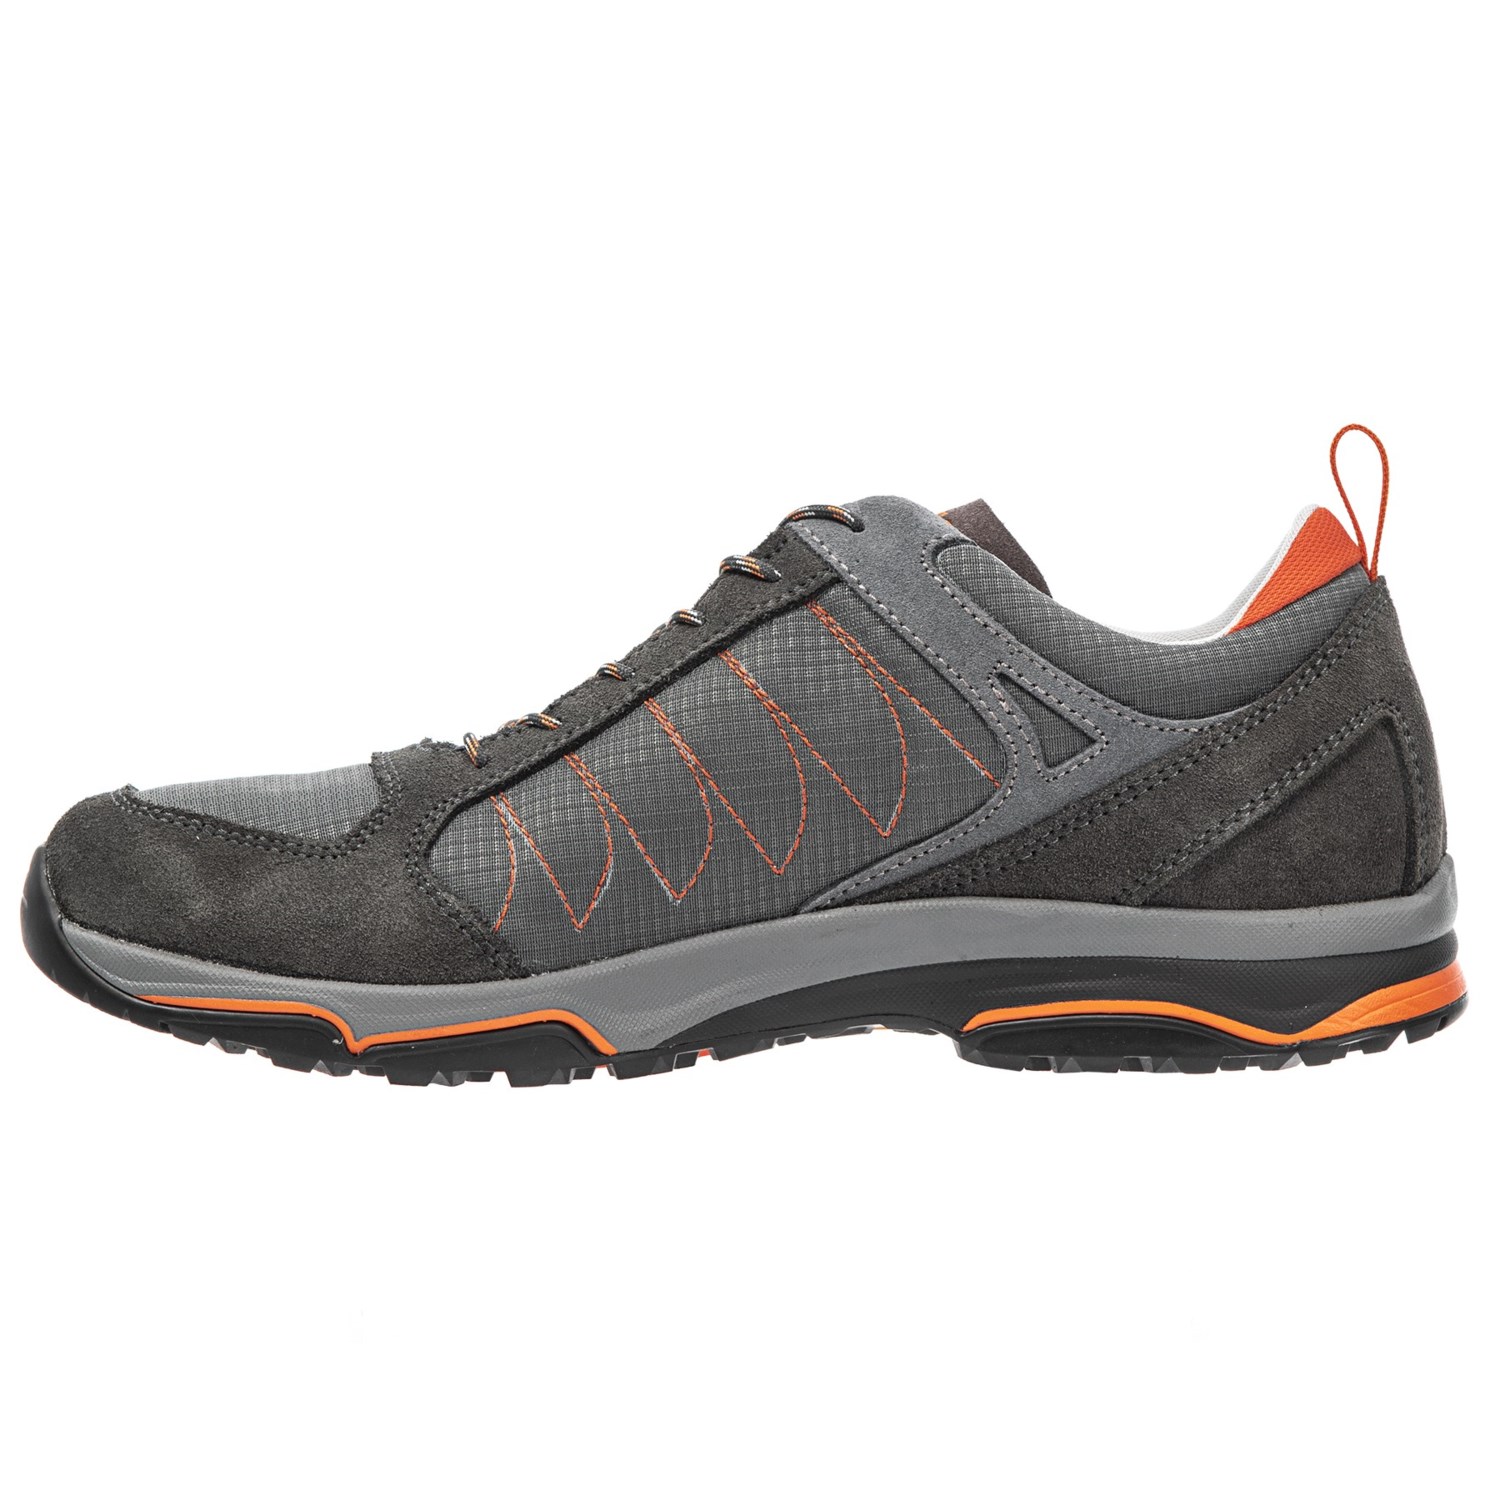 Asolo Sword GV Gore-Tex® Hiking Shoes (For Men) - Save 42%